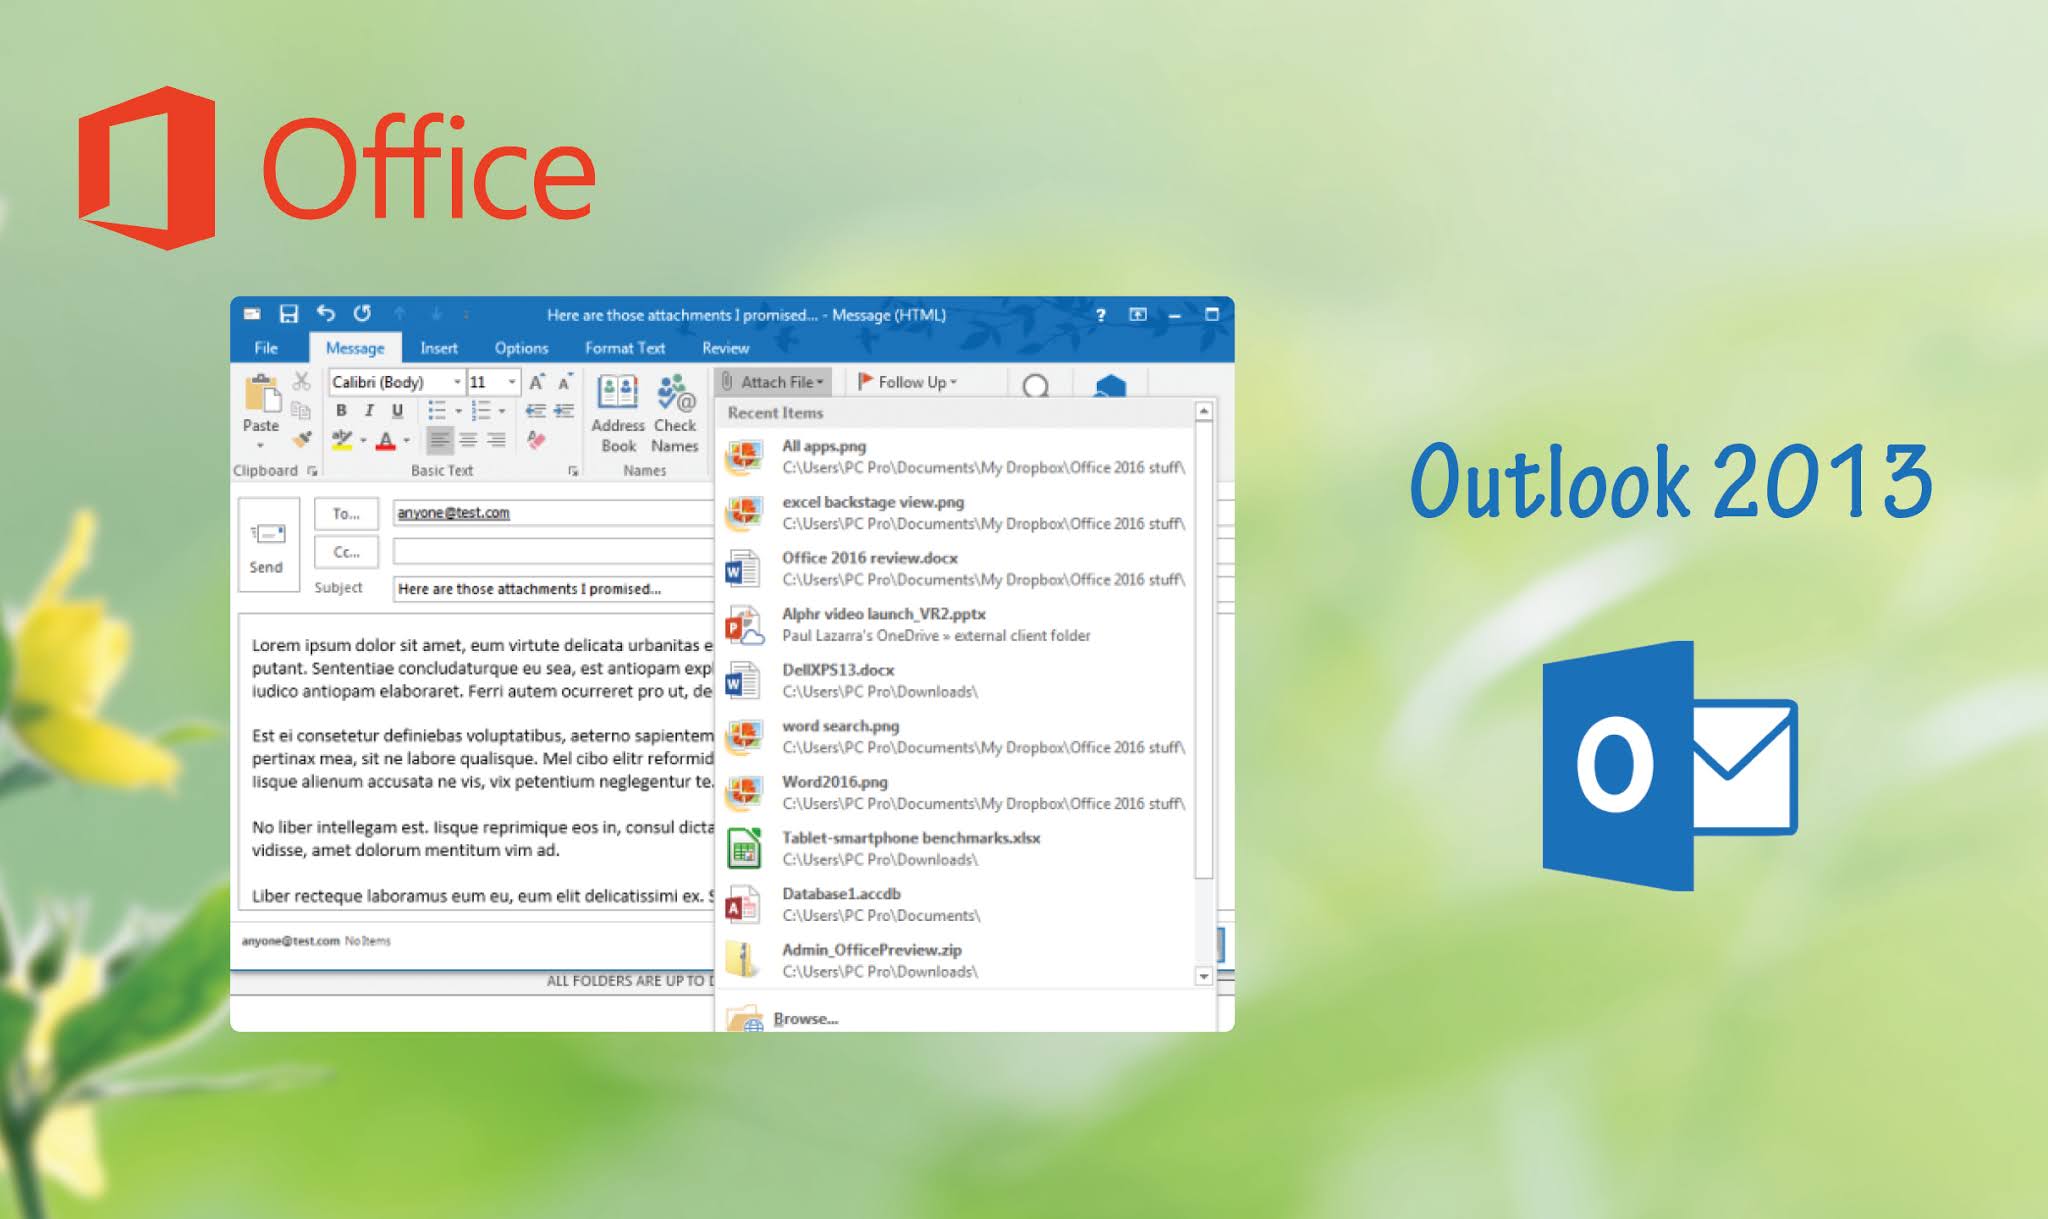 Office Outlook 2013